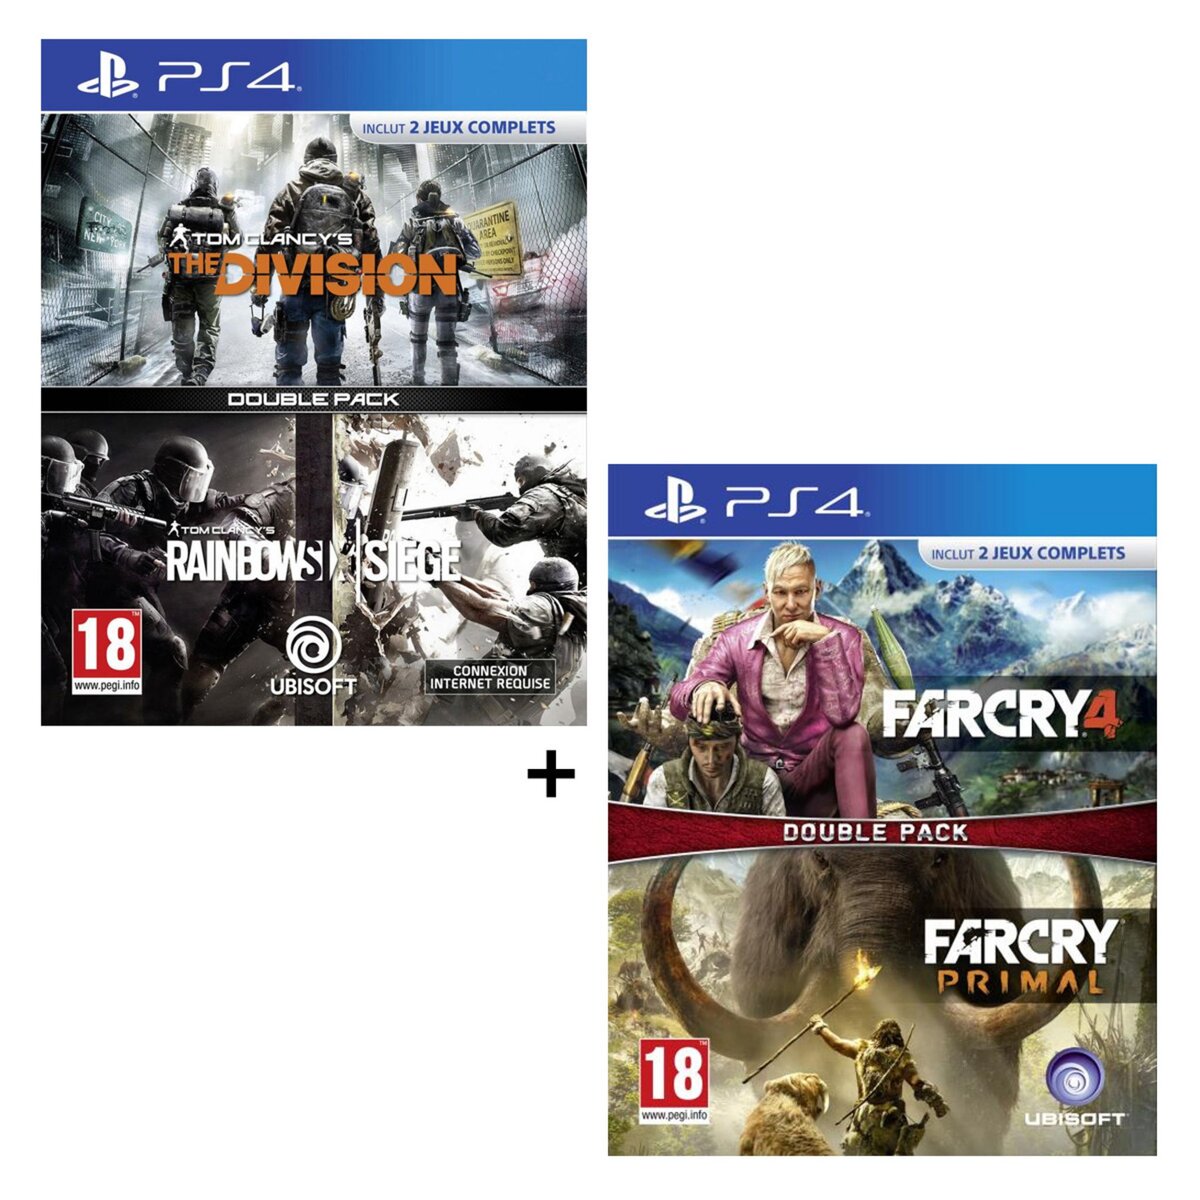 Compilation Rainbow Six Siege + The Division PS4 + Compilation Far Cry Primal + Far Cry 4 PS4